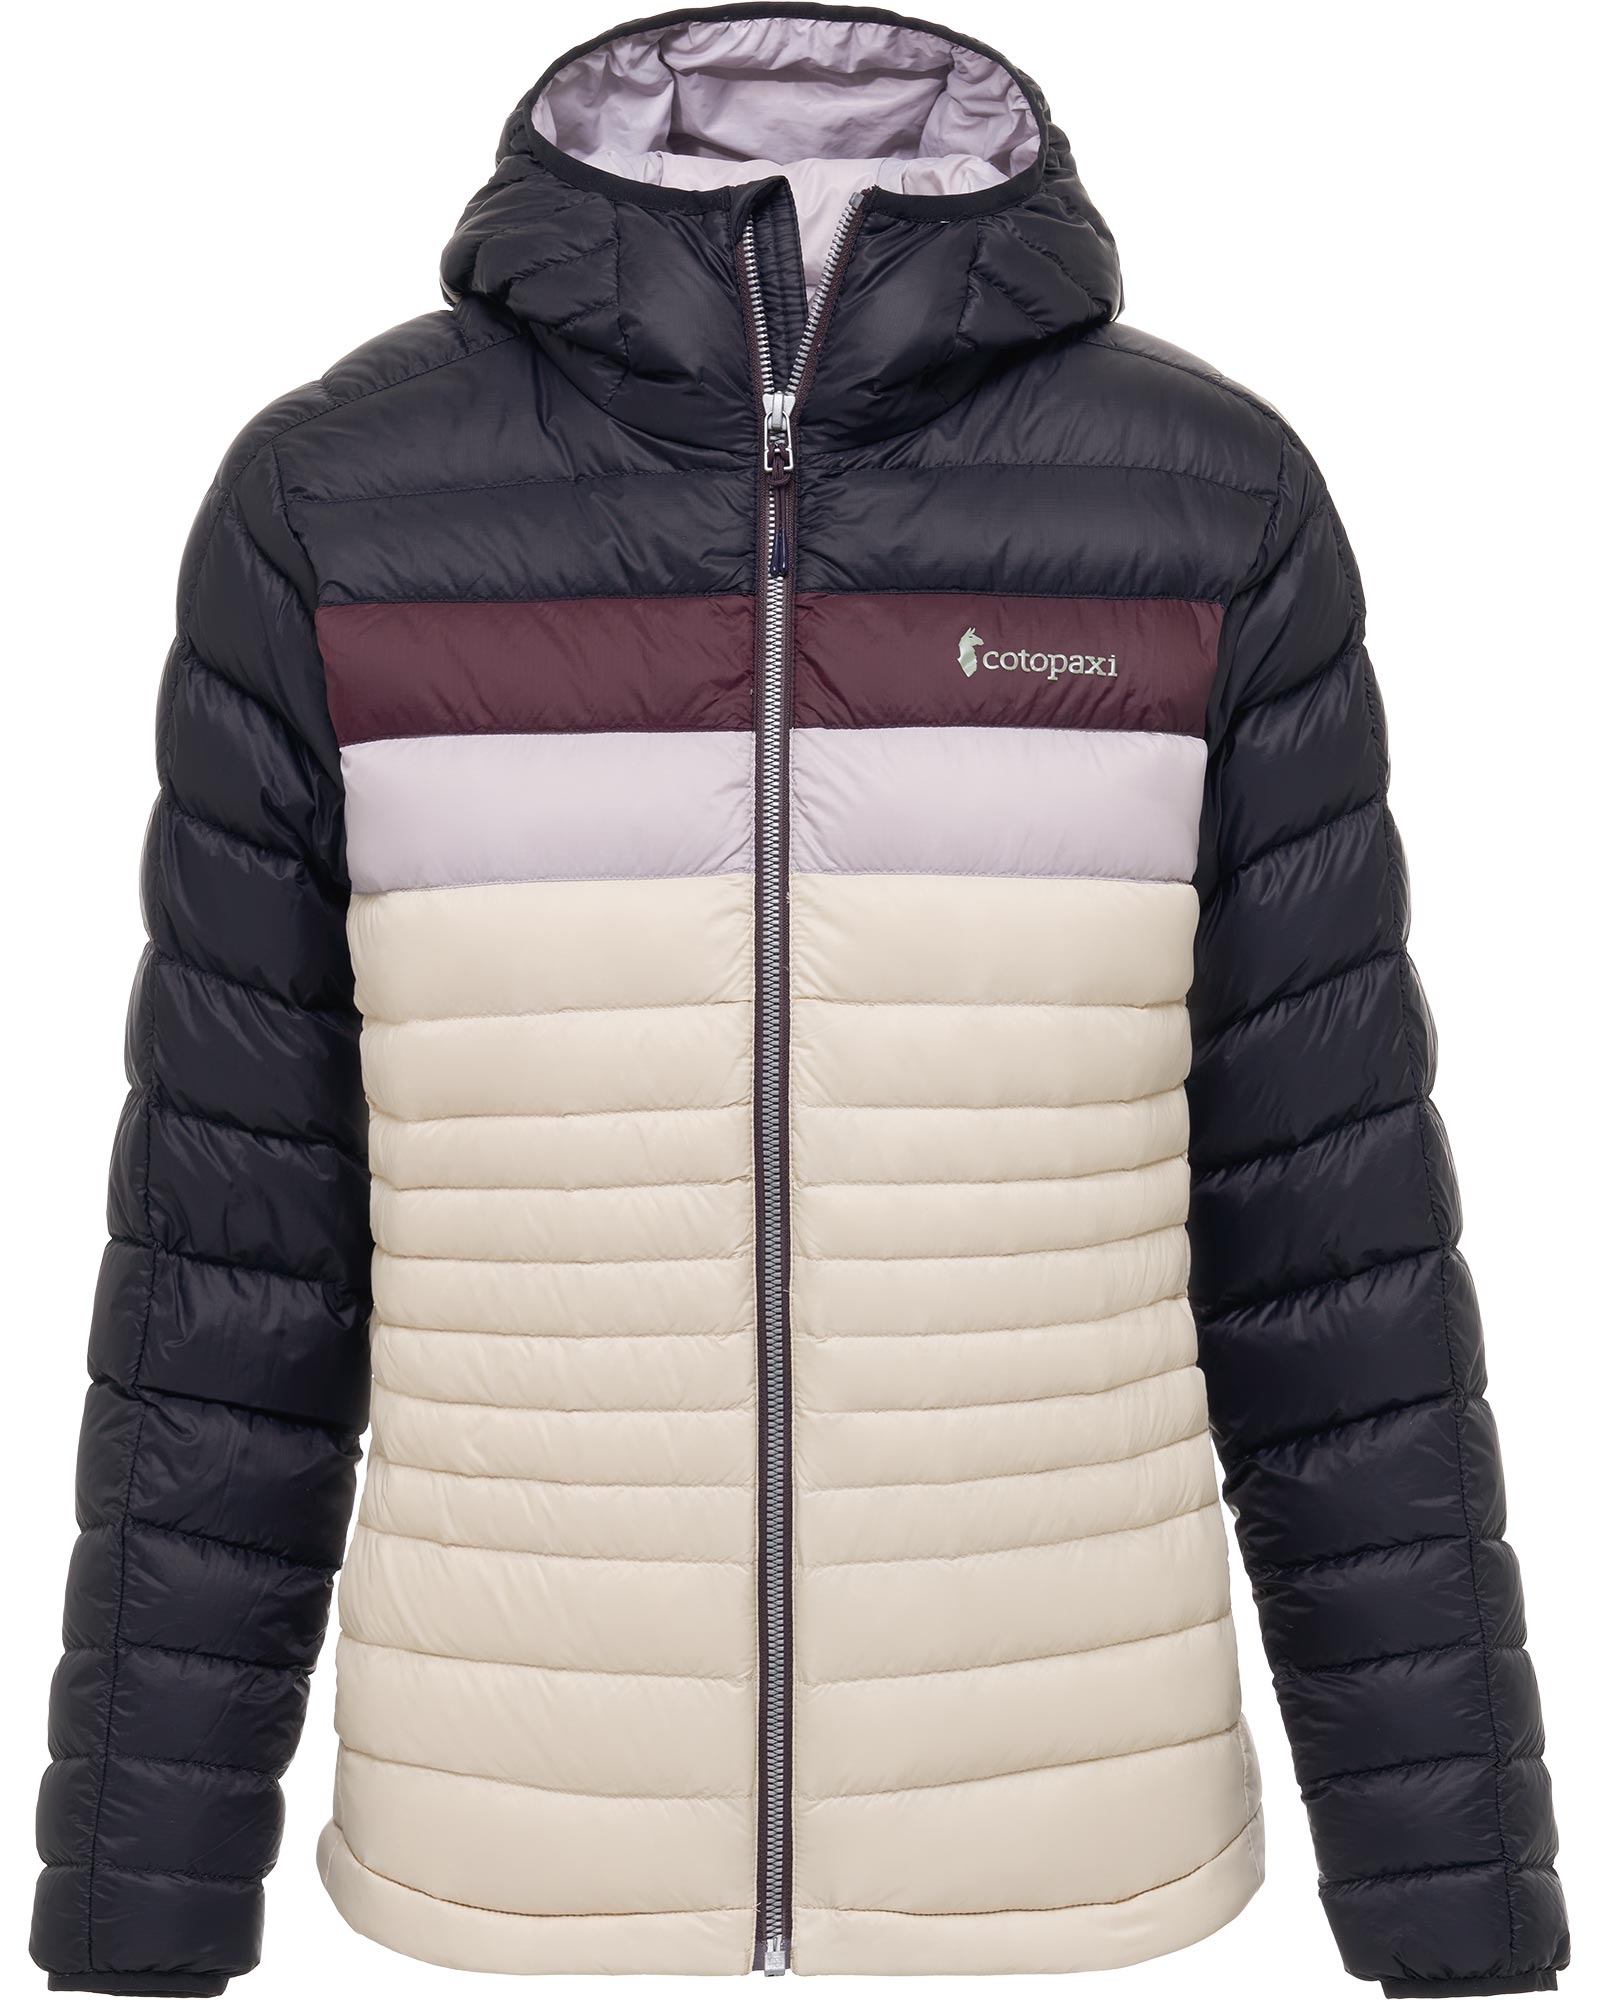 Cotopaxi Fuego Women’s Hooded Down Jacket - Black/Cream S